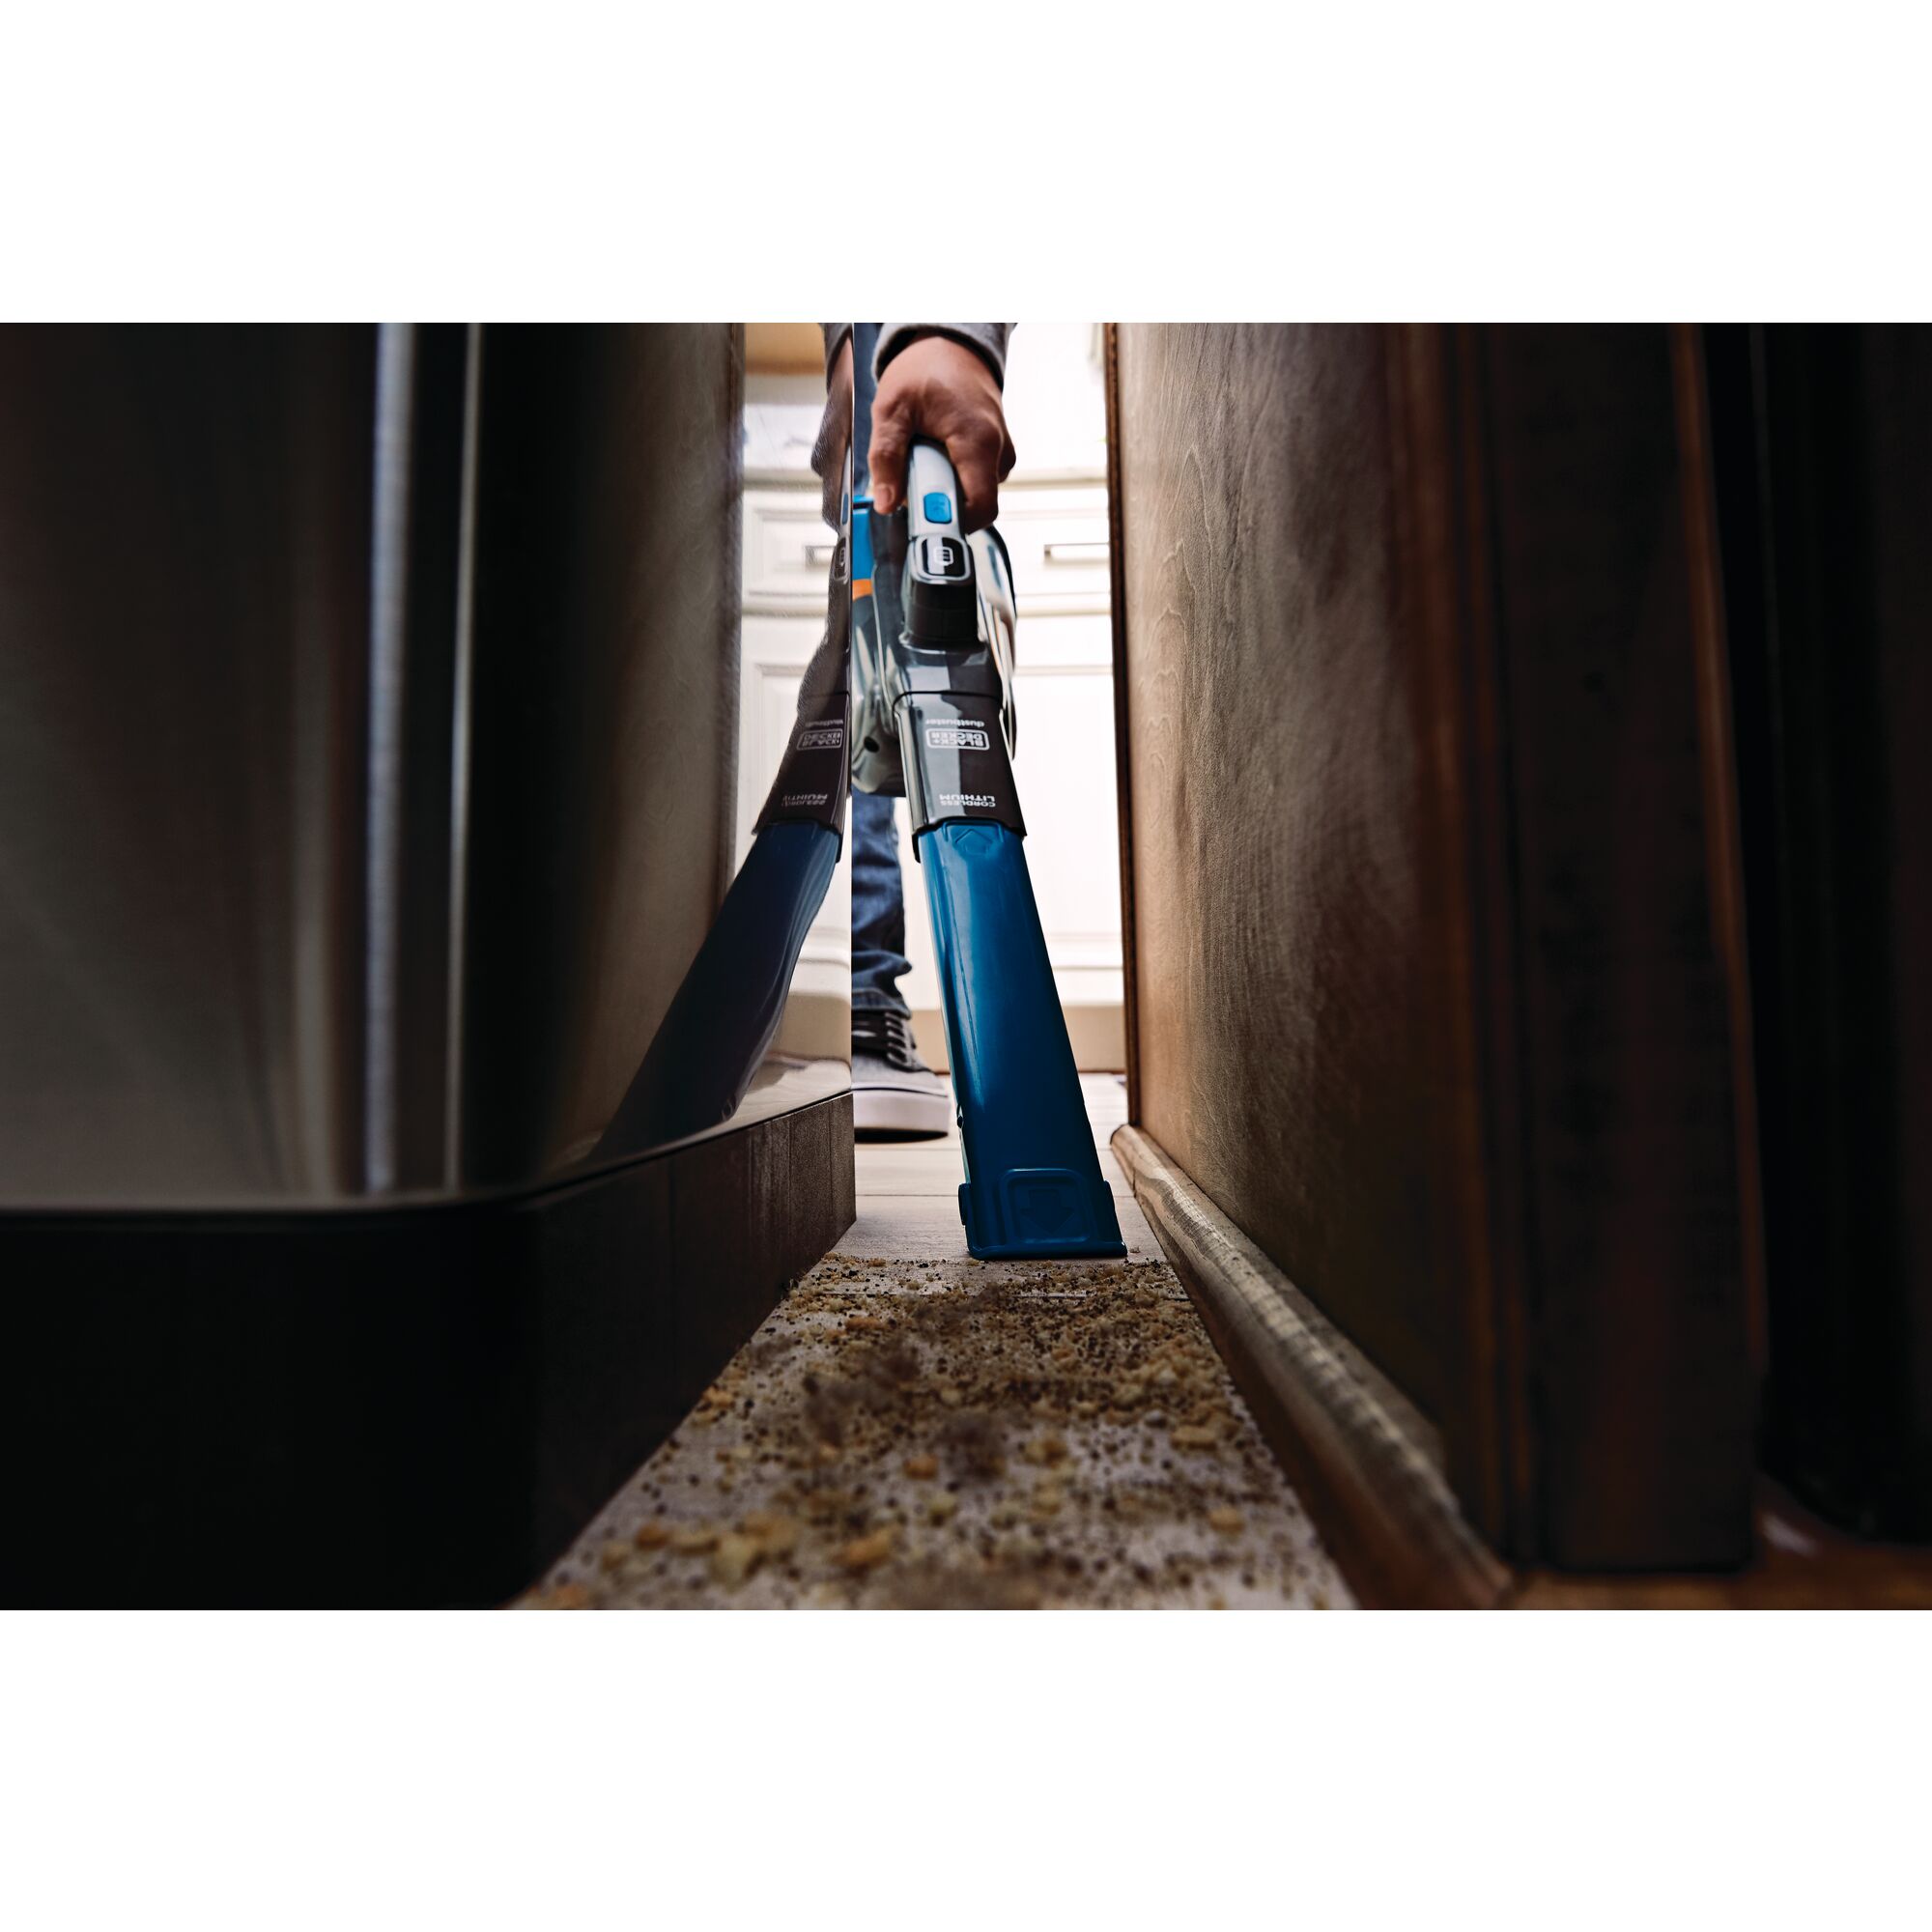 12 volt max dustbuster advanced clean plus cordless hand vacuum being used to vacuum spilled material from a hard to reach gap behind a couch.